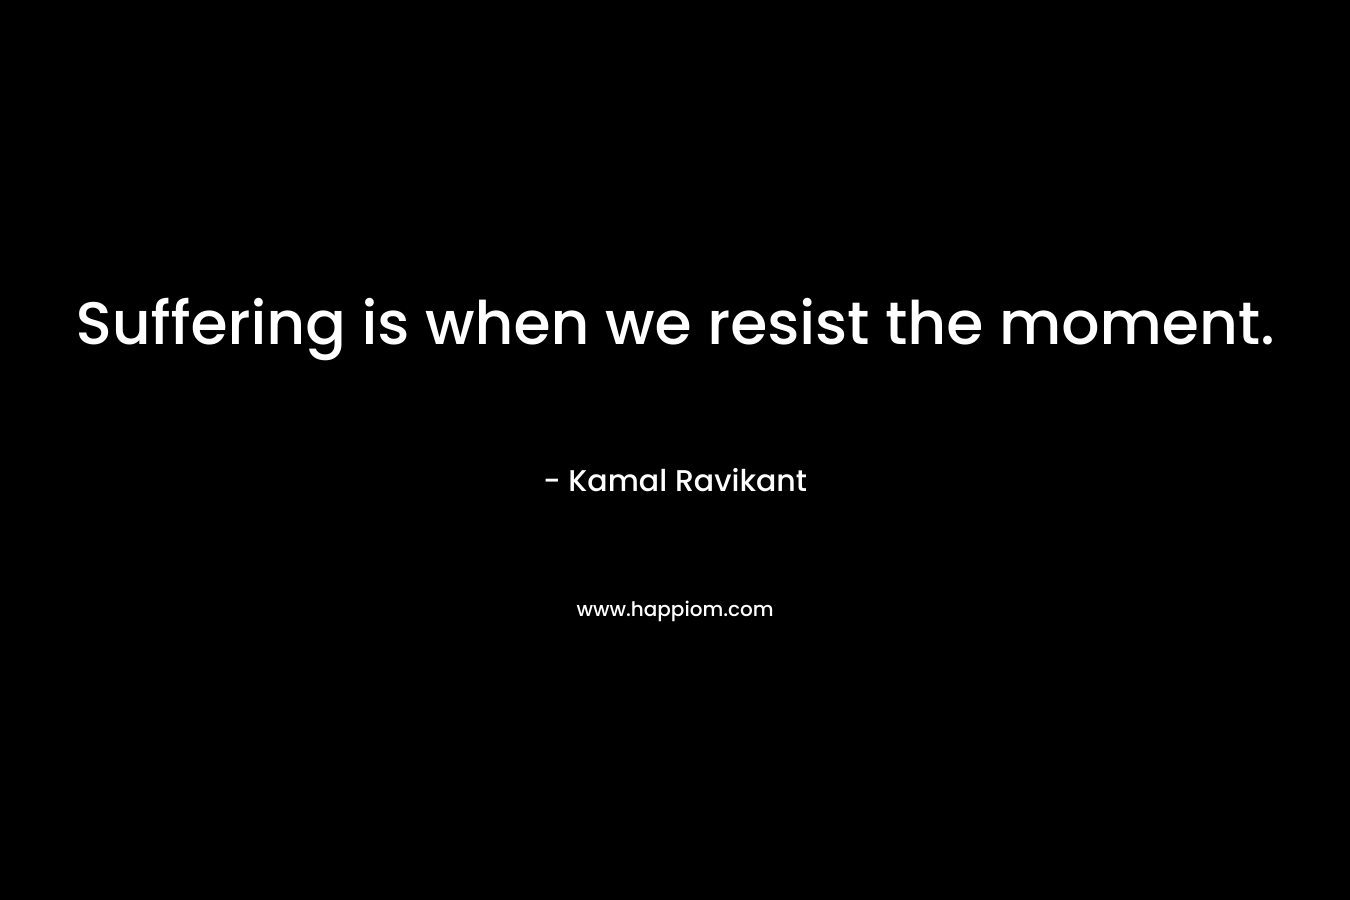 Suffering is when we resist the moment.